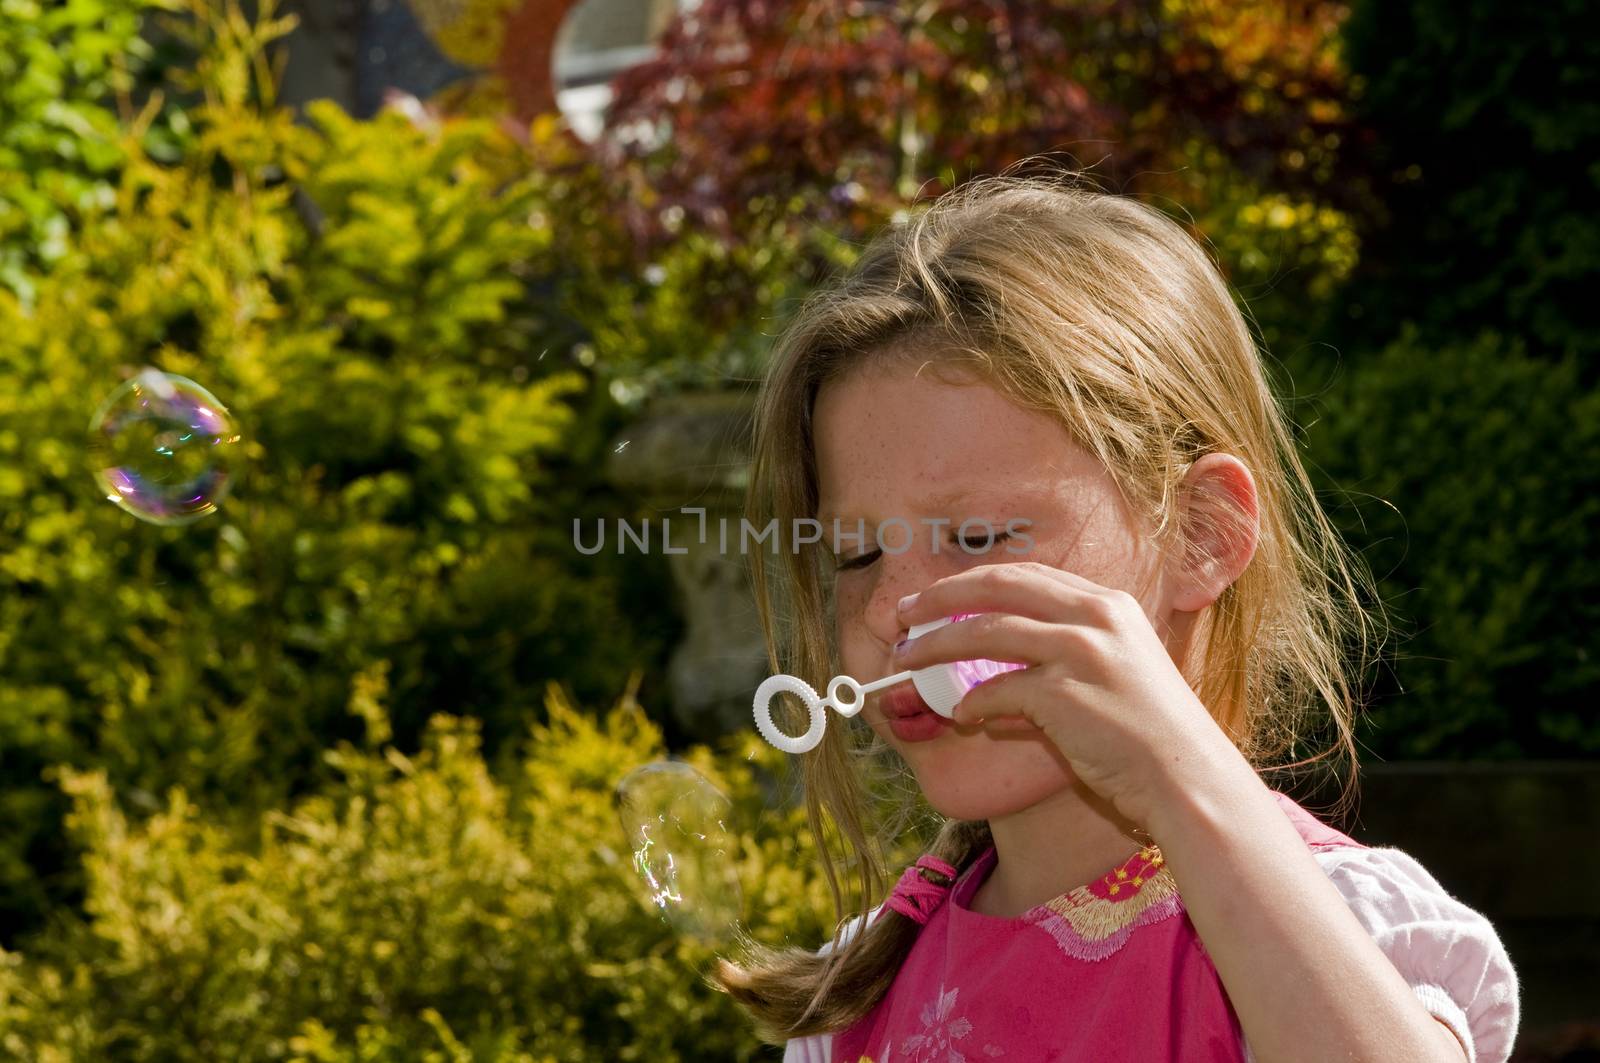 blond causcasian girl blowing bubbles by compuinfoto